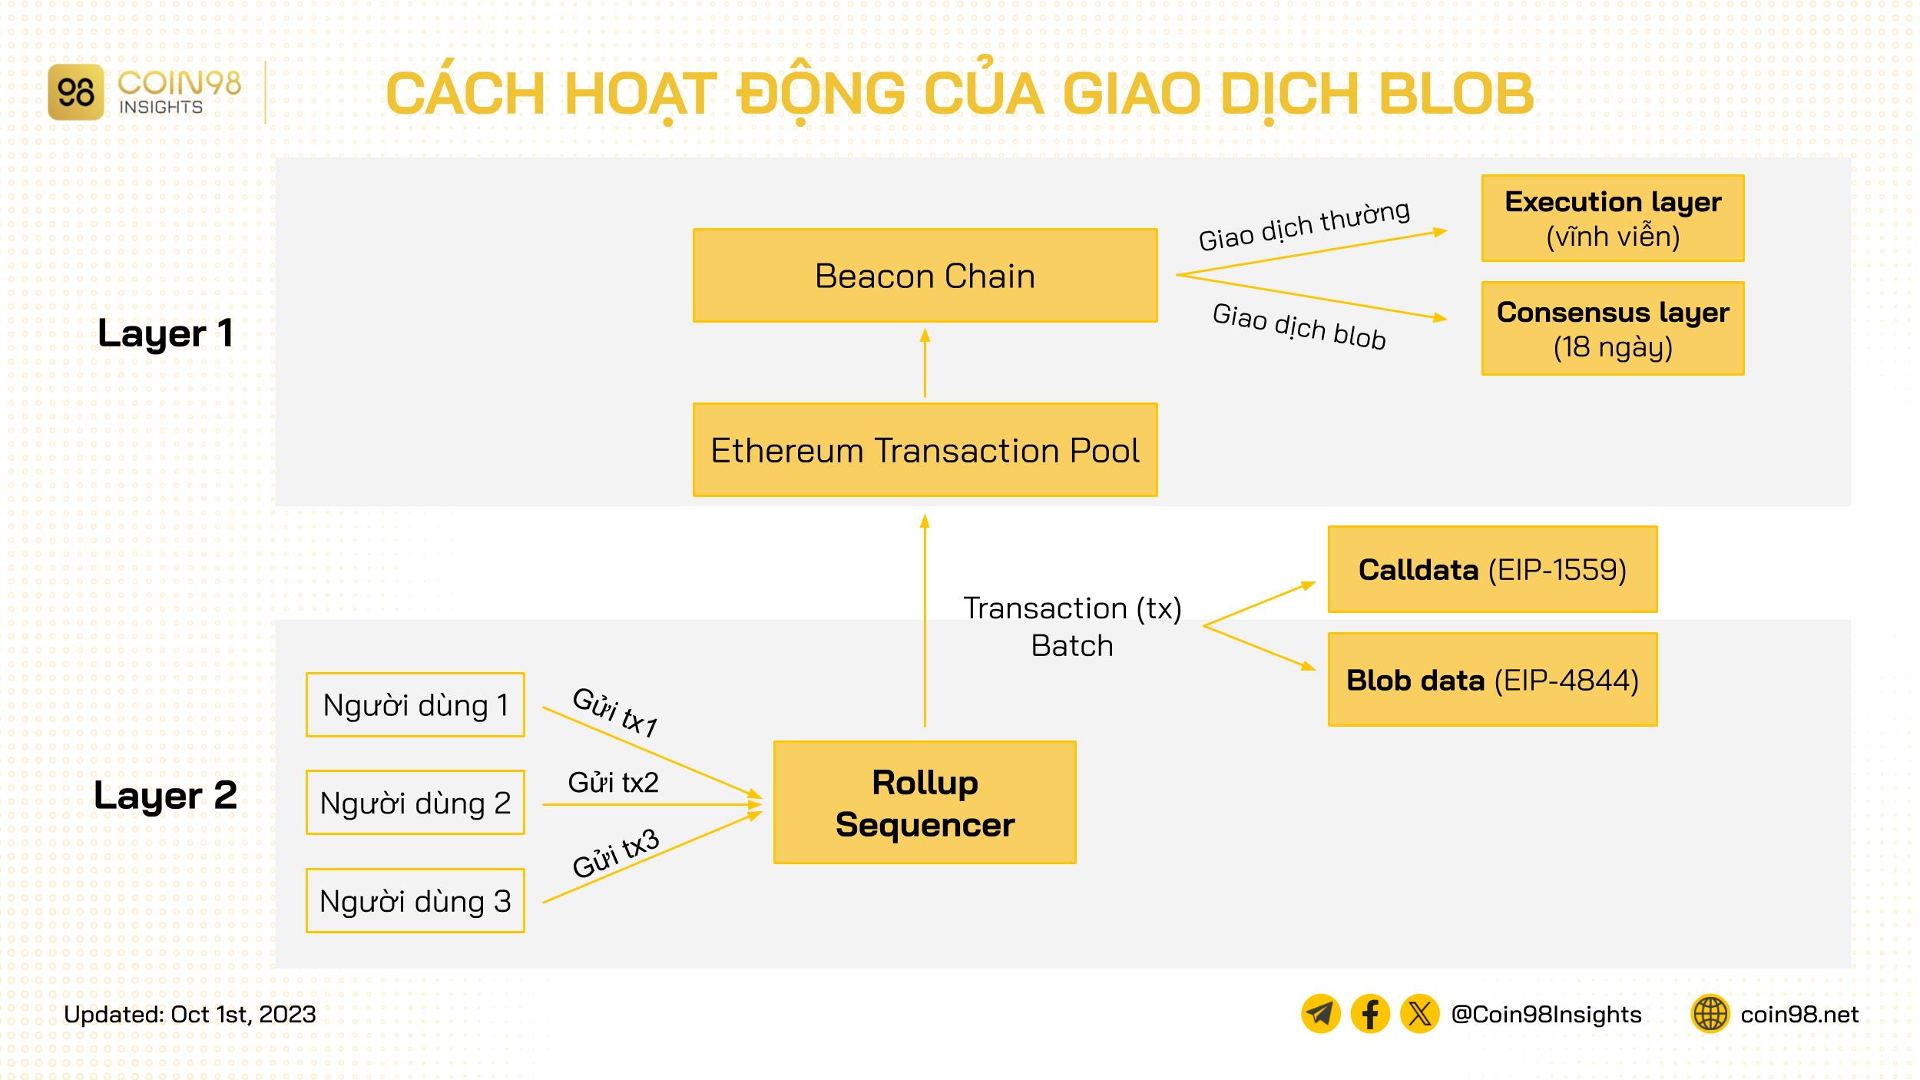 giao dịch blob eip 4844